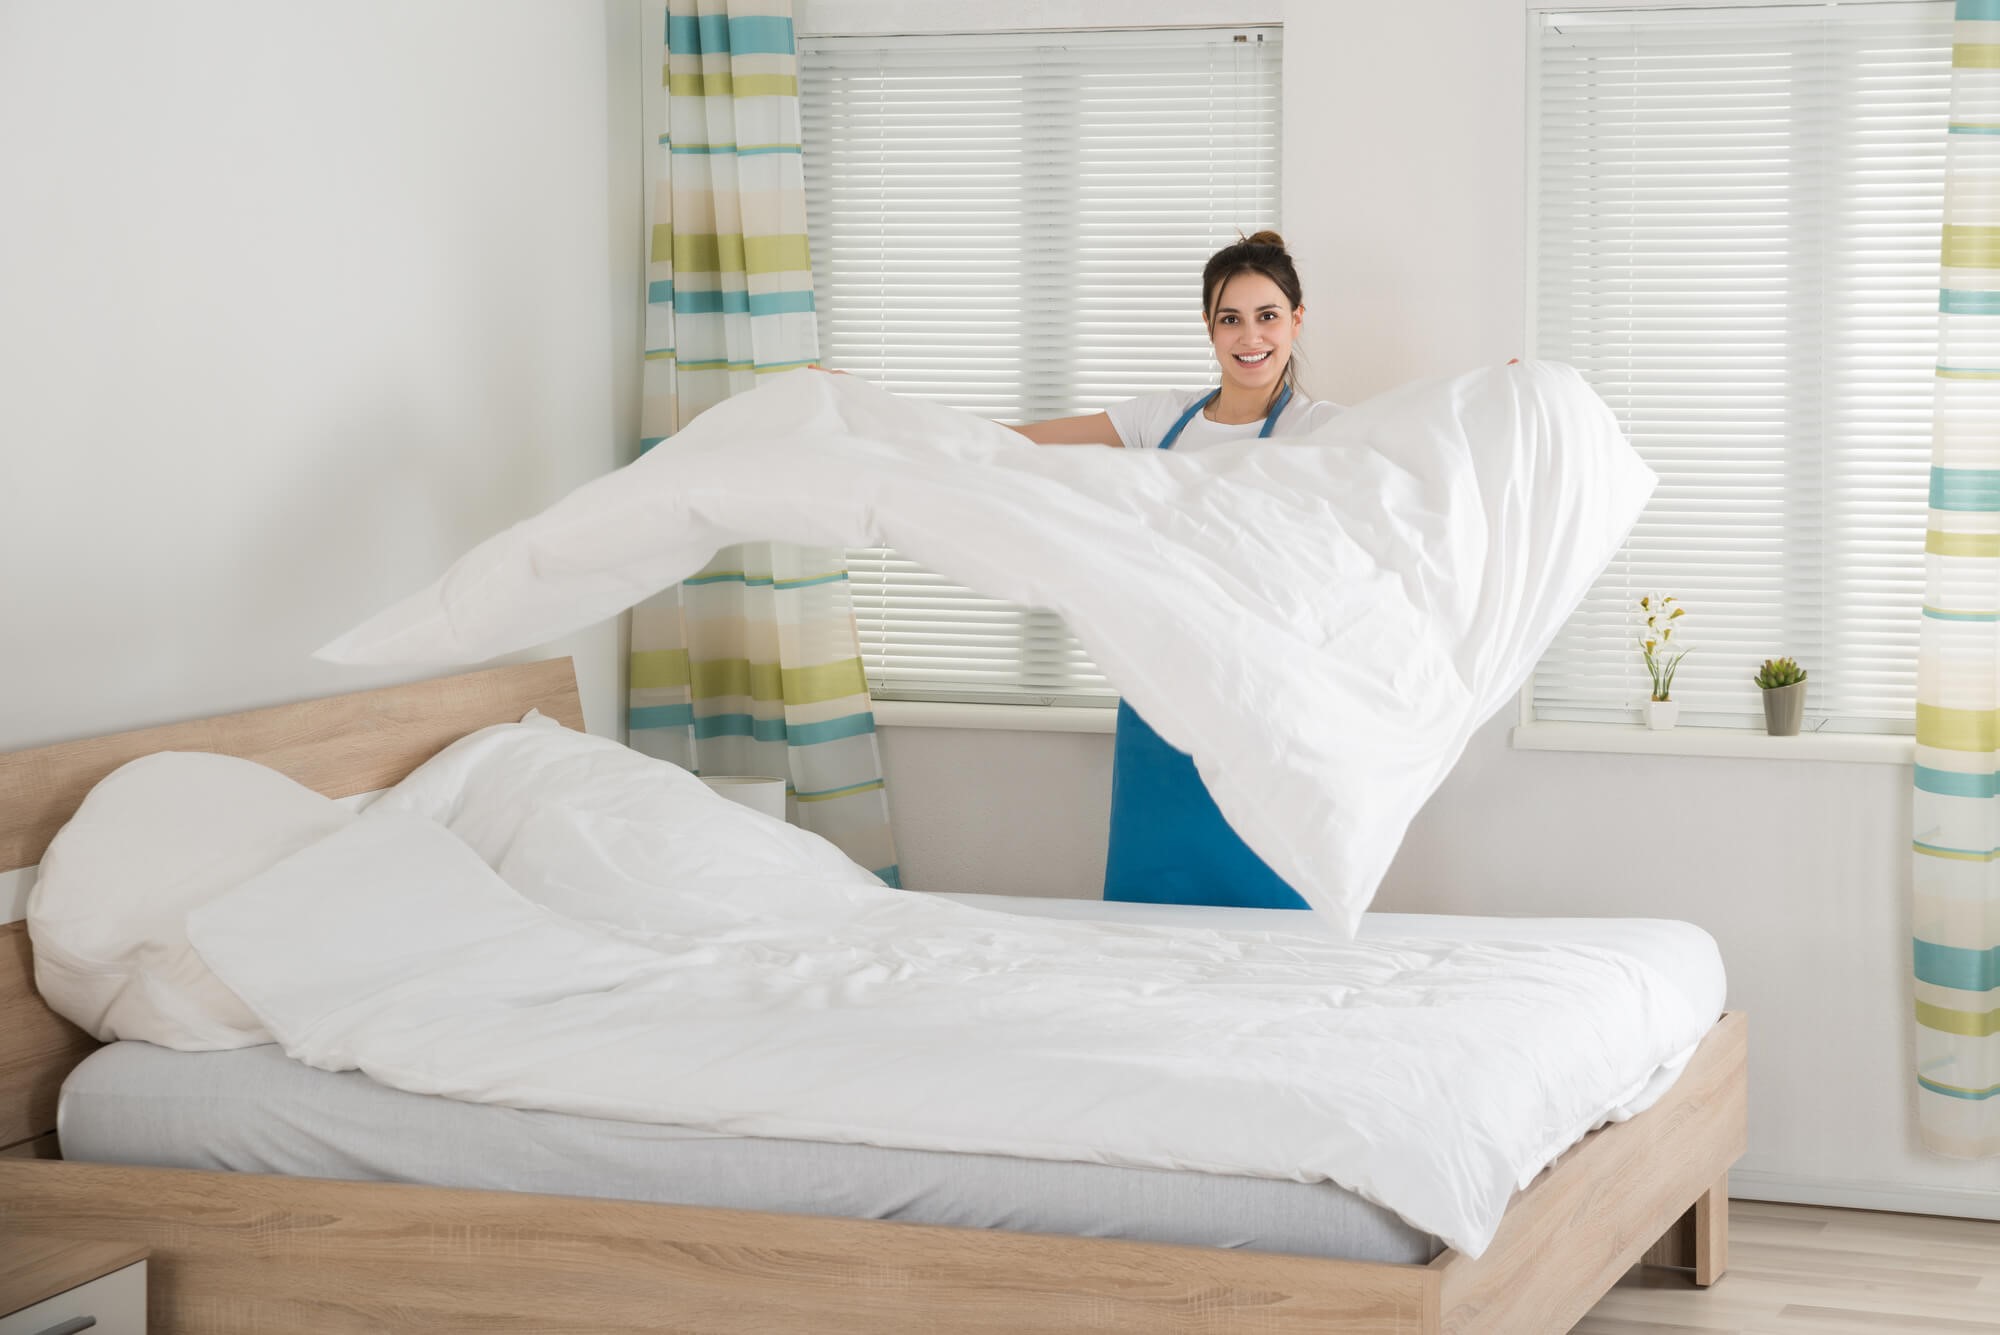 Methods To Remove Smoke Smell From Mattress